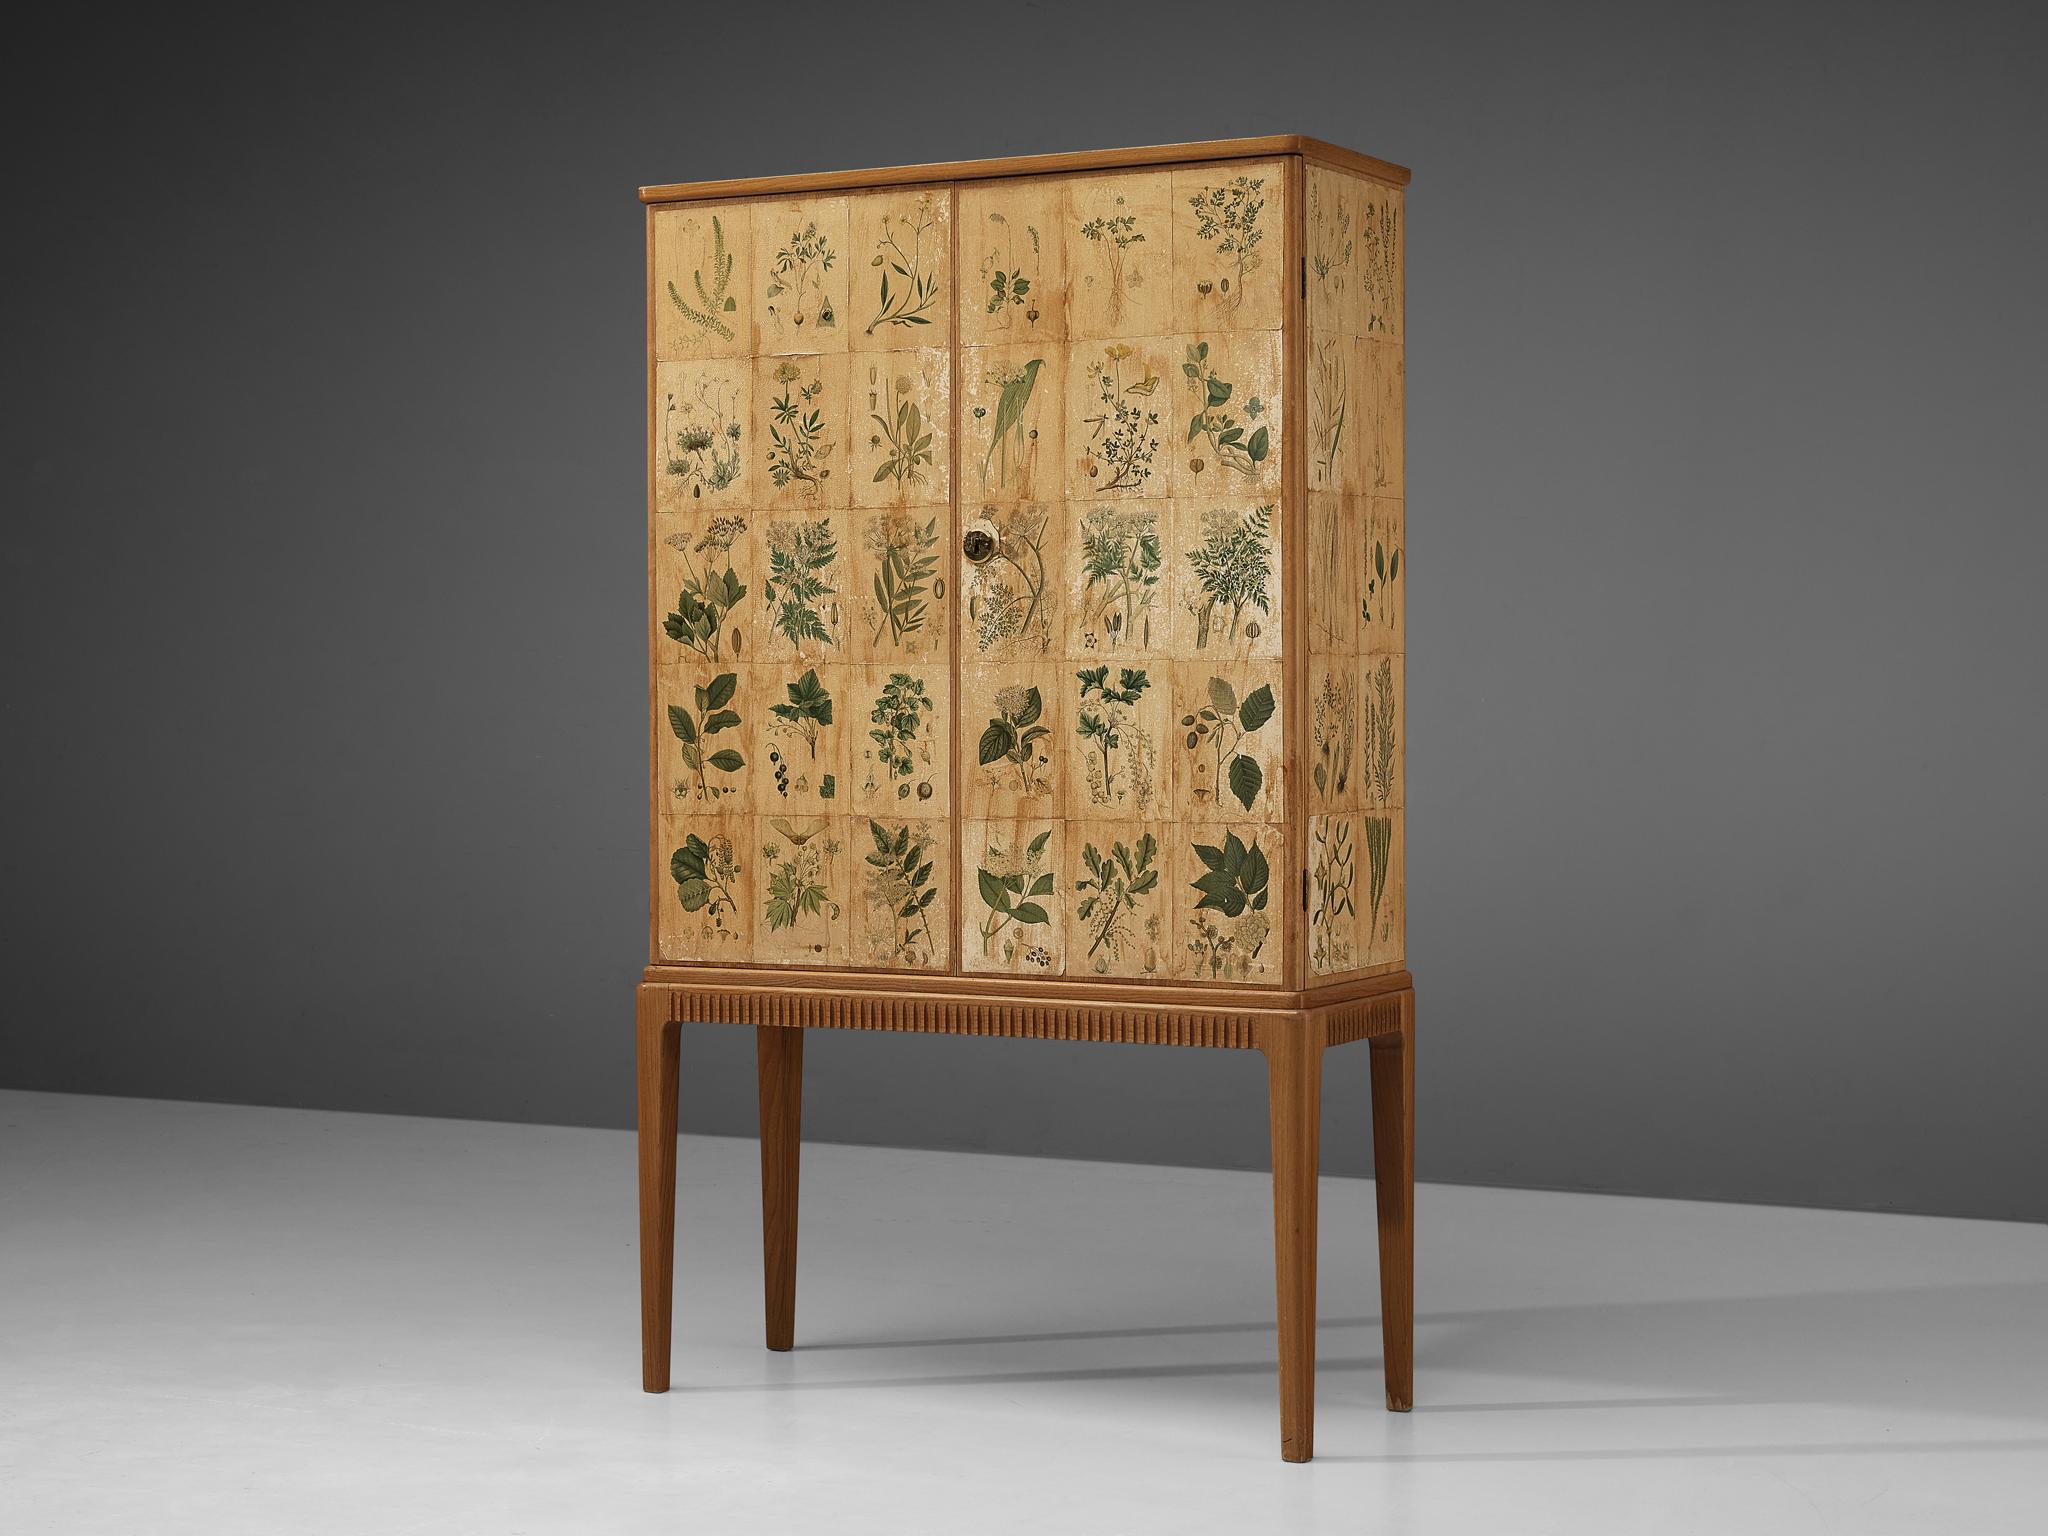 Inspired by Josef Frank, cabinet ‘Flora’, ash, paper with floral motifs, Scandinavia, 1950s

Delicate cabinet with floral paper surfaces that resemble the famous ‘Flora’ cabinets by Josef Frank (1885-1967). Like Josef Frank designs features this